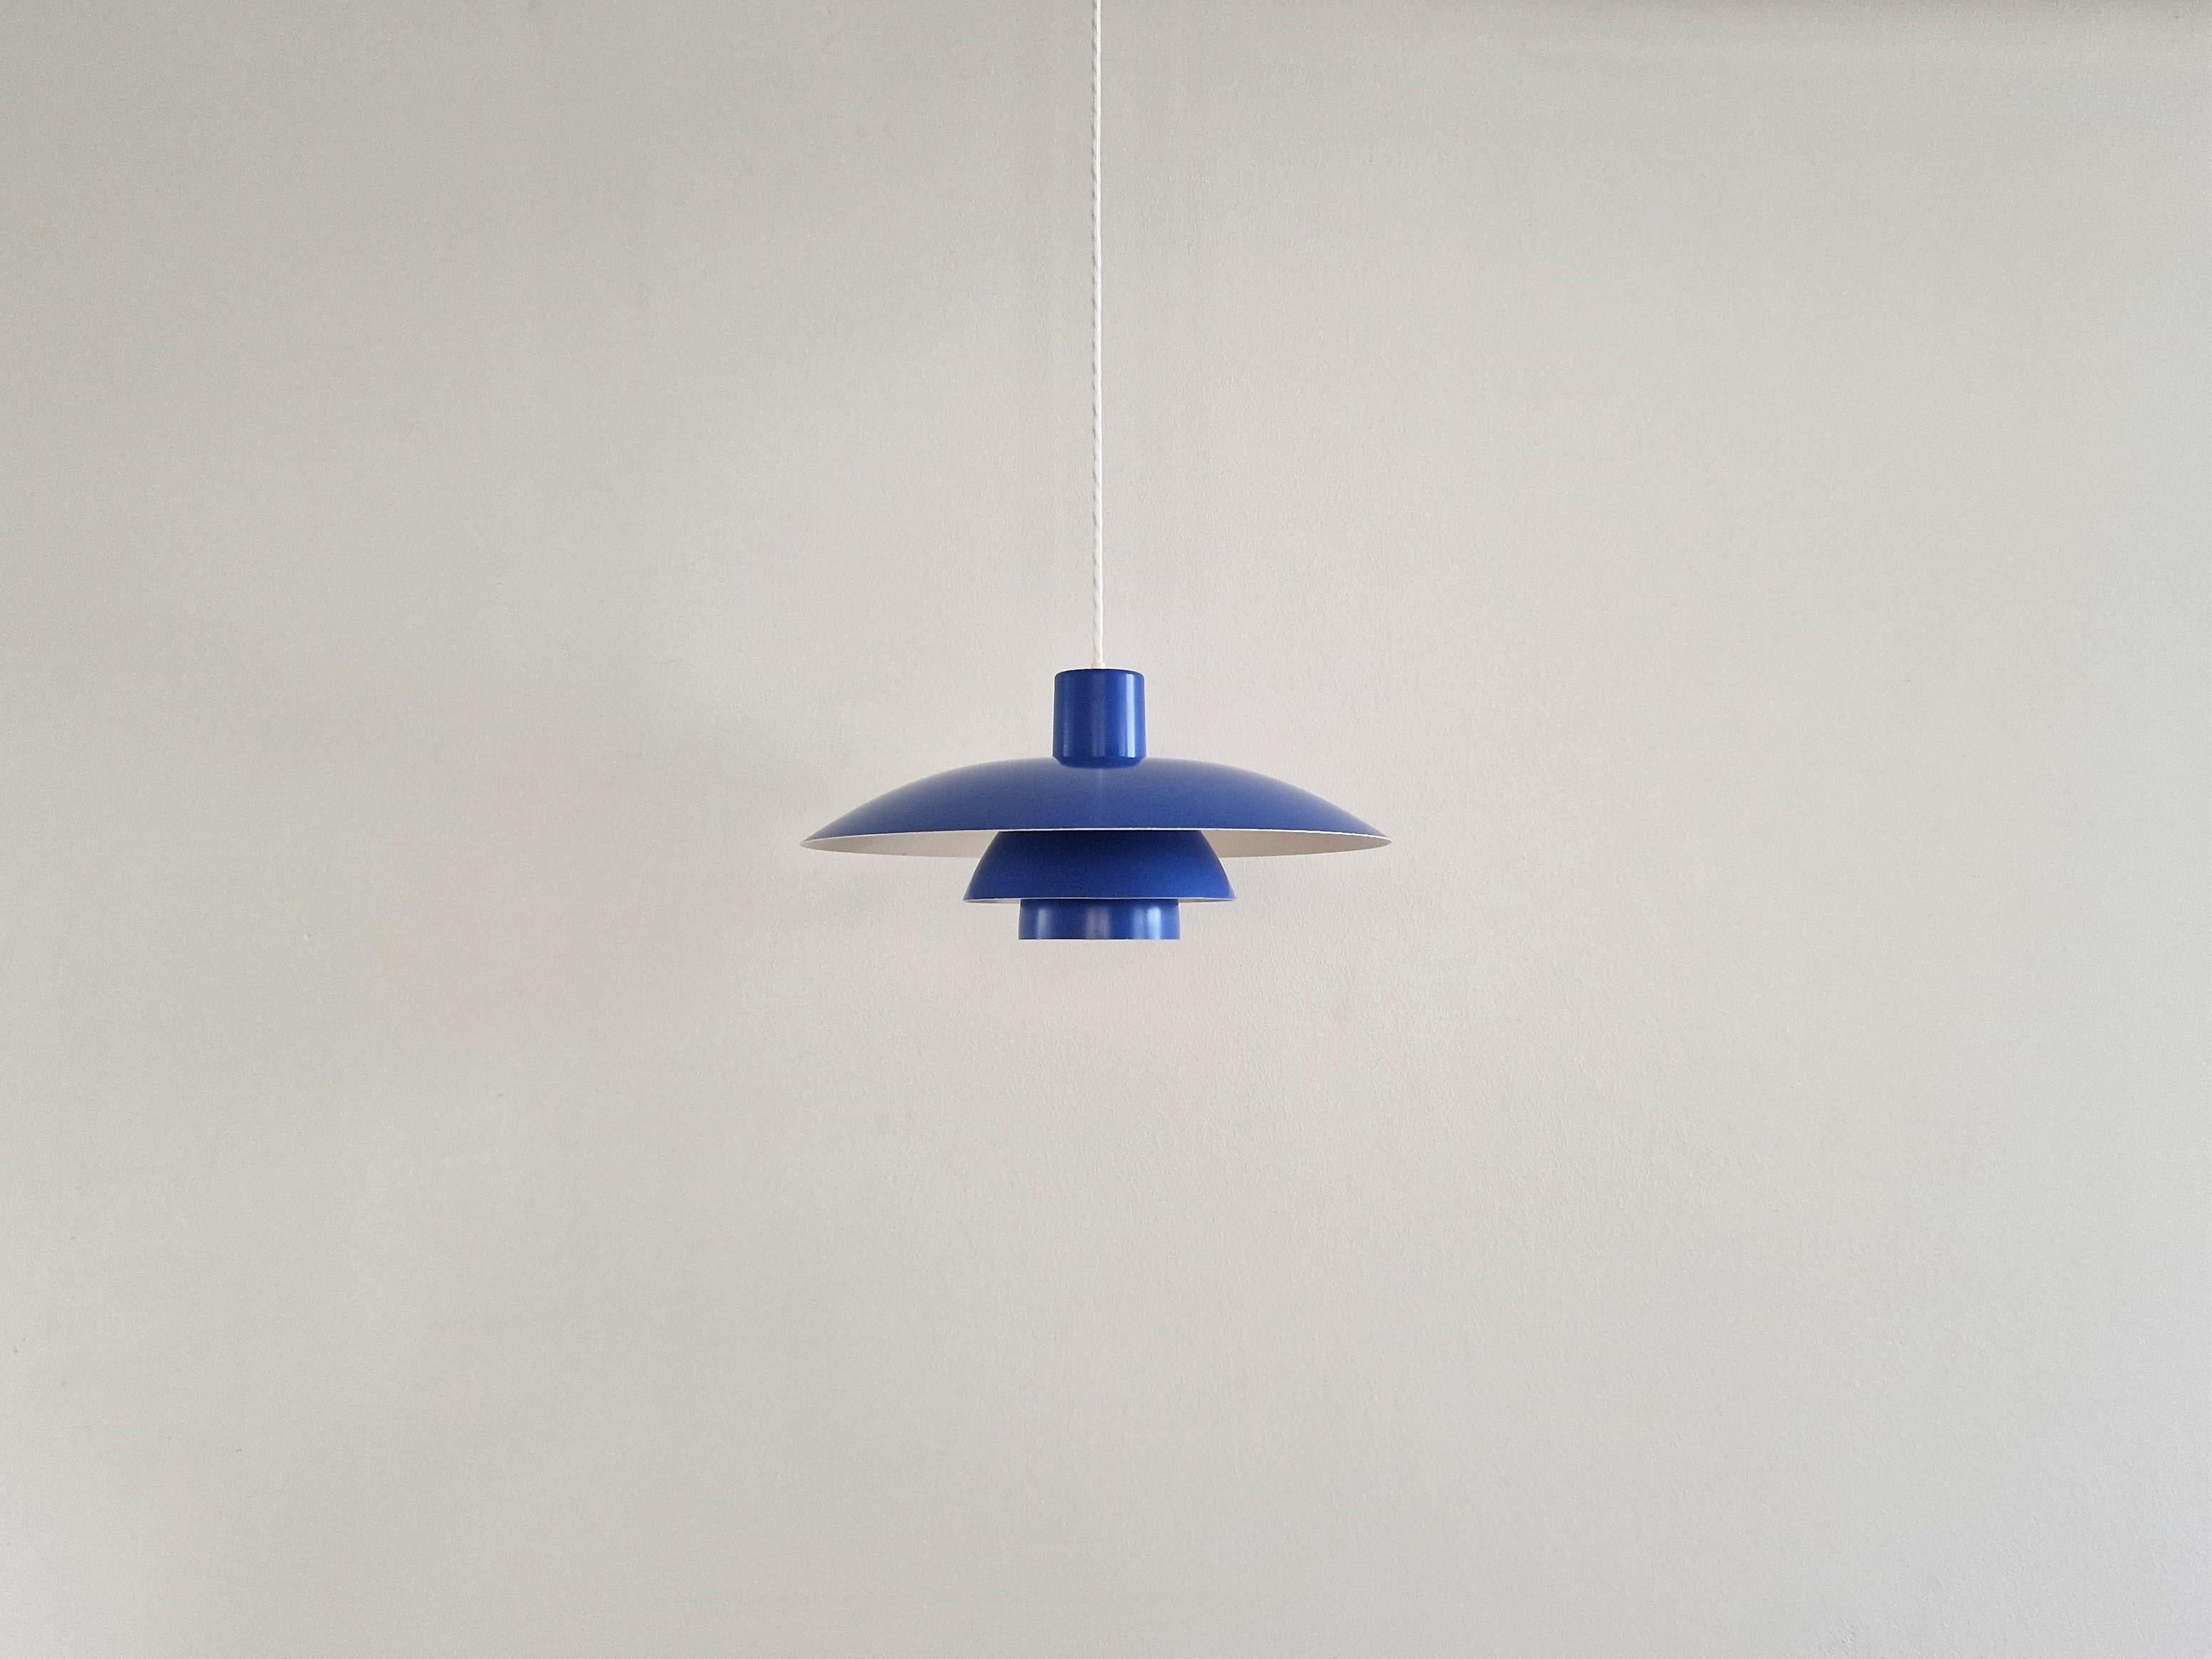 The PH 4/3 pendant lamp is a beautiful and classic design by Poul Henningsen. The lamp has been produced by Louis Poulsen since 1966 until today. This is an original and early version that was made in red, white and blue. We have all of these